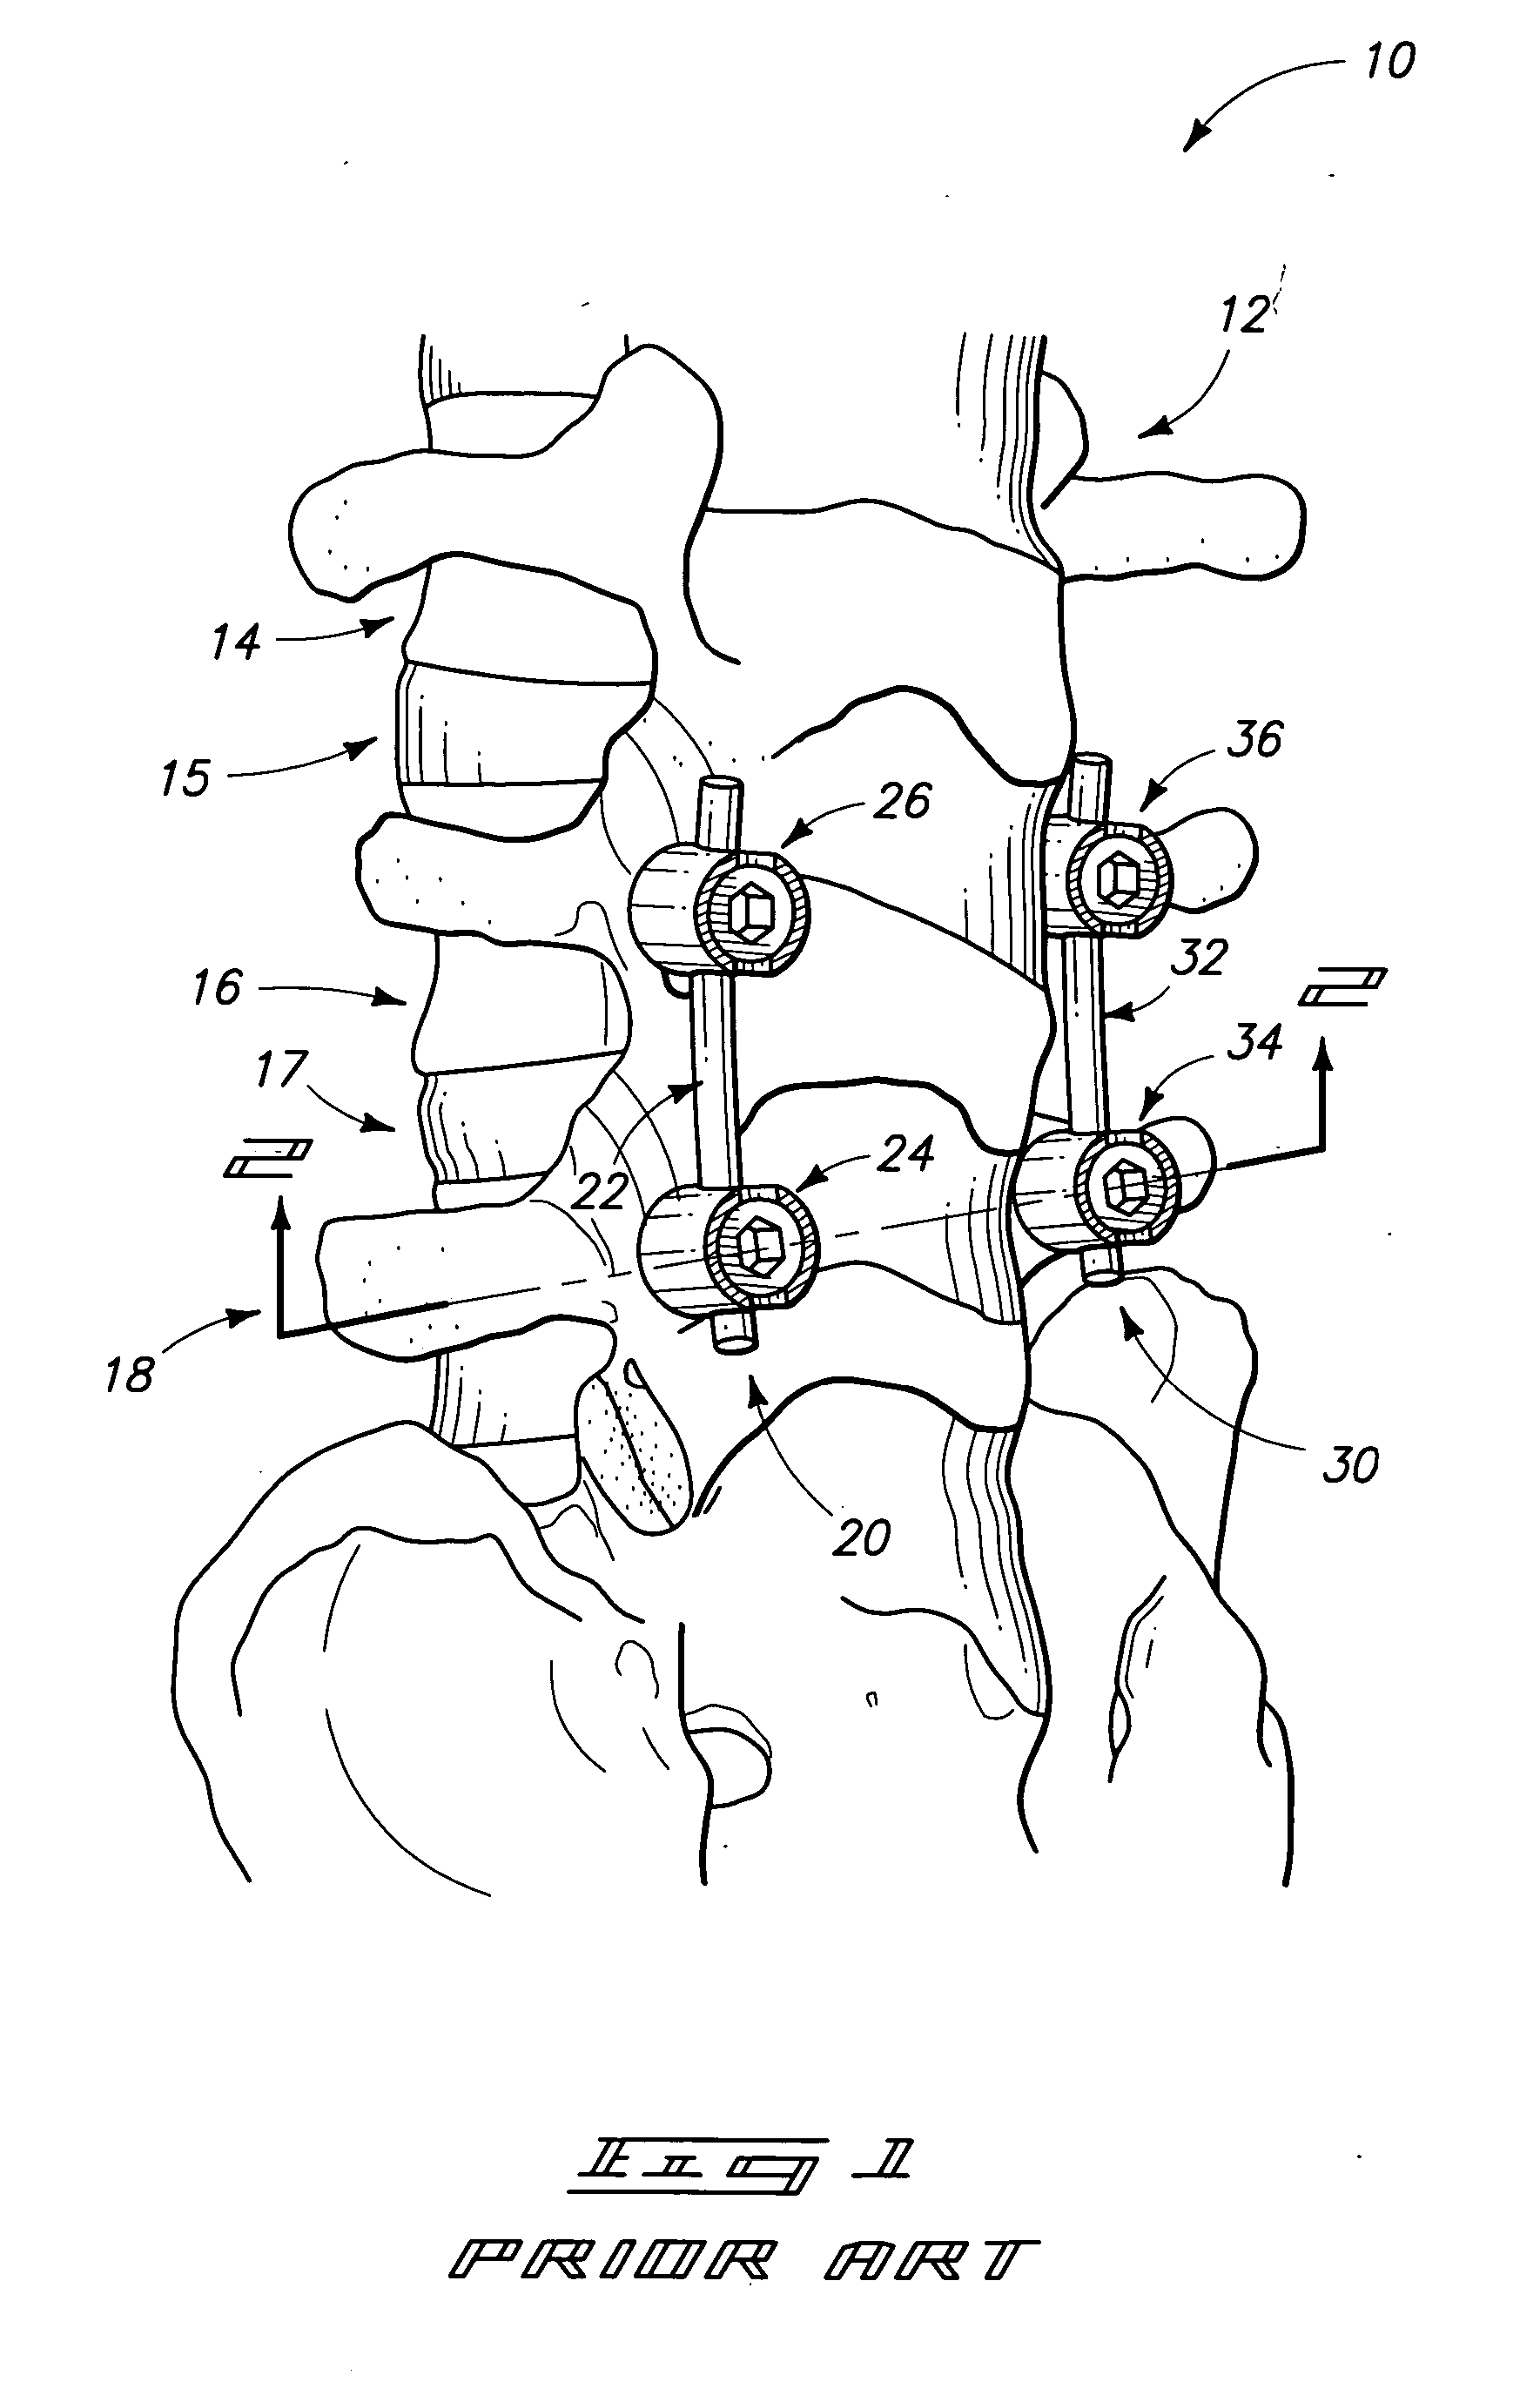 Screws configured to engage bones, and methods of attaching implants to skeletal regions